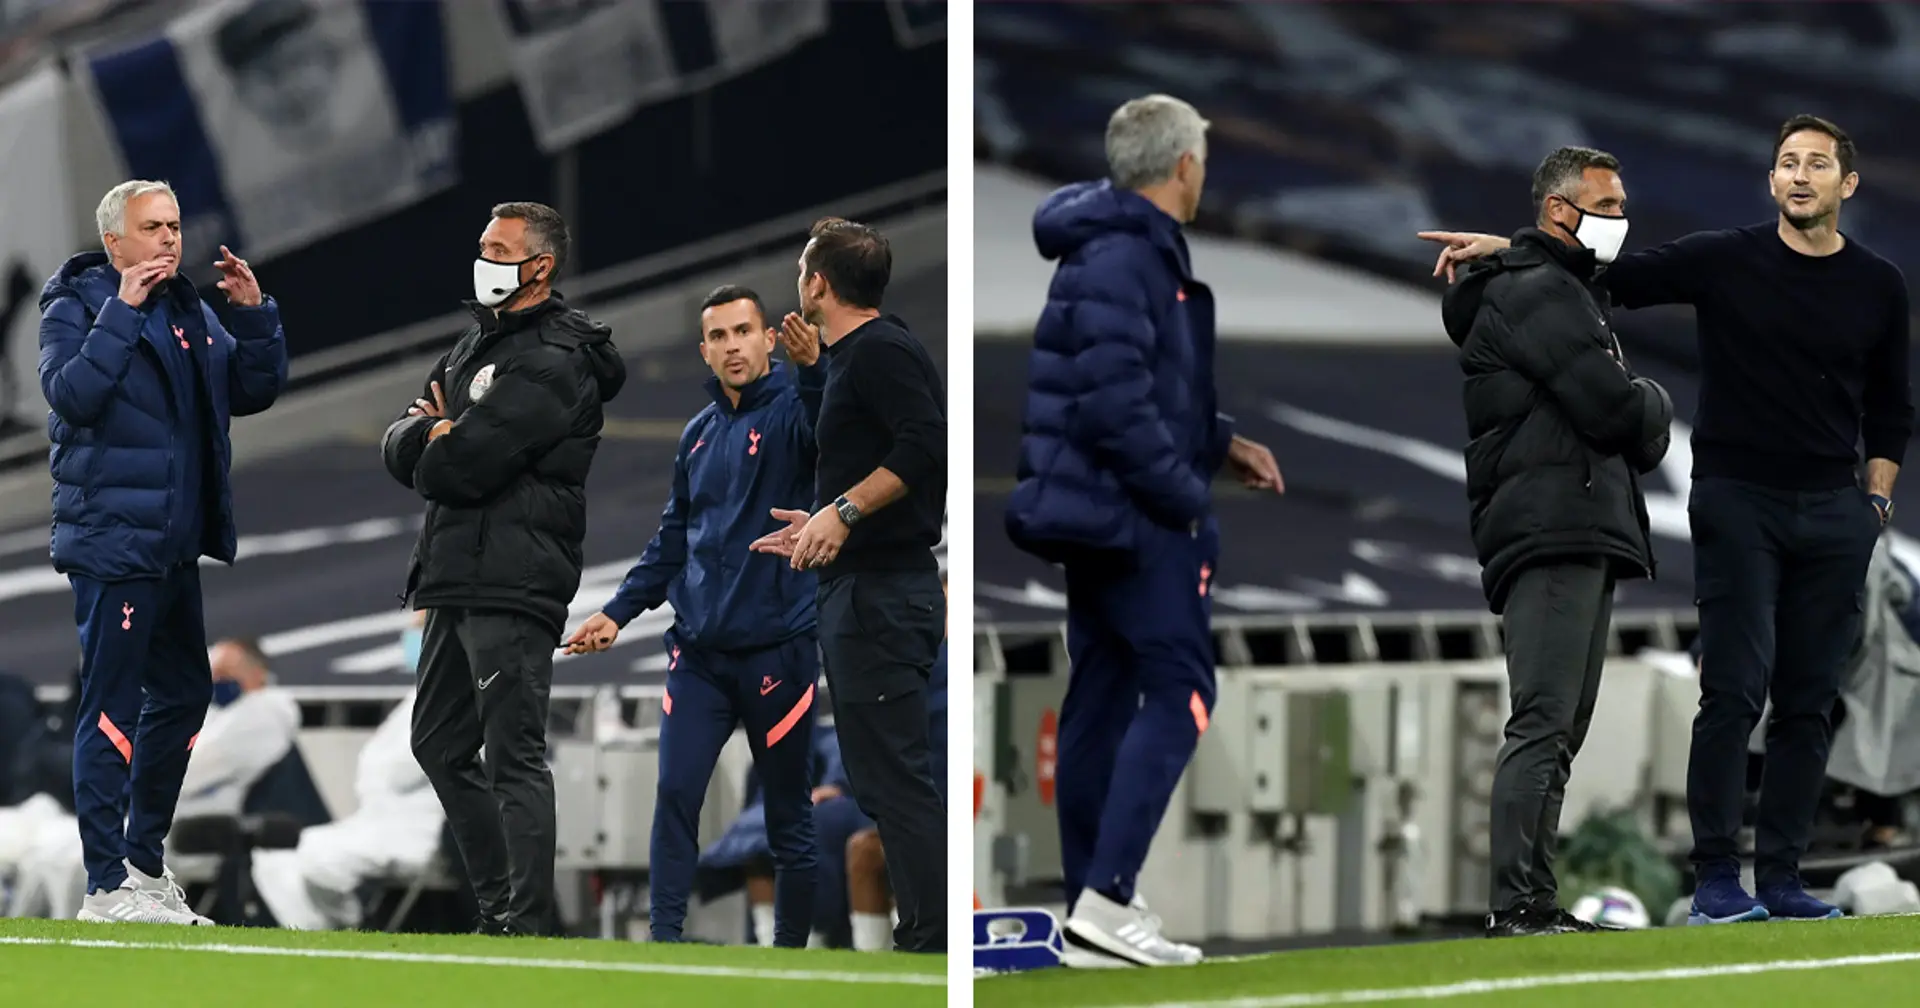 'When you're losing 3-0 you're not standing up here': Mourinho and Lampard have words on touchline